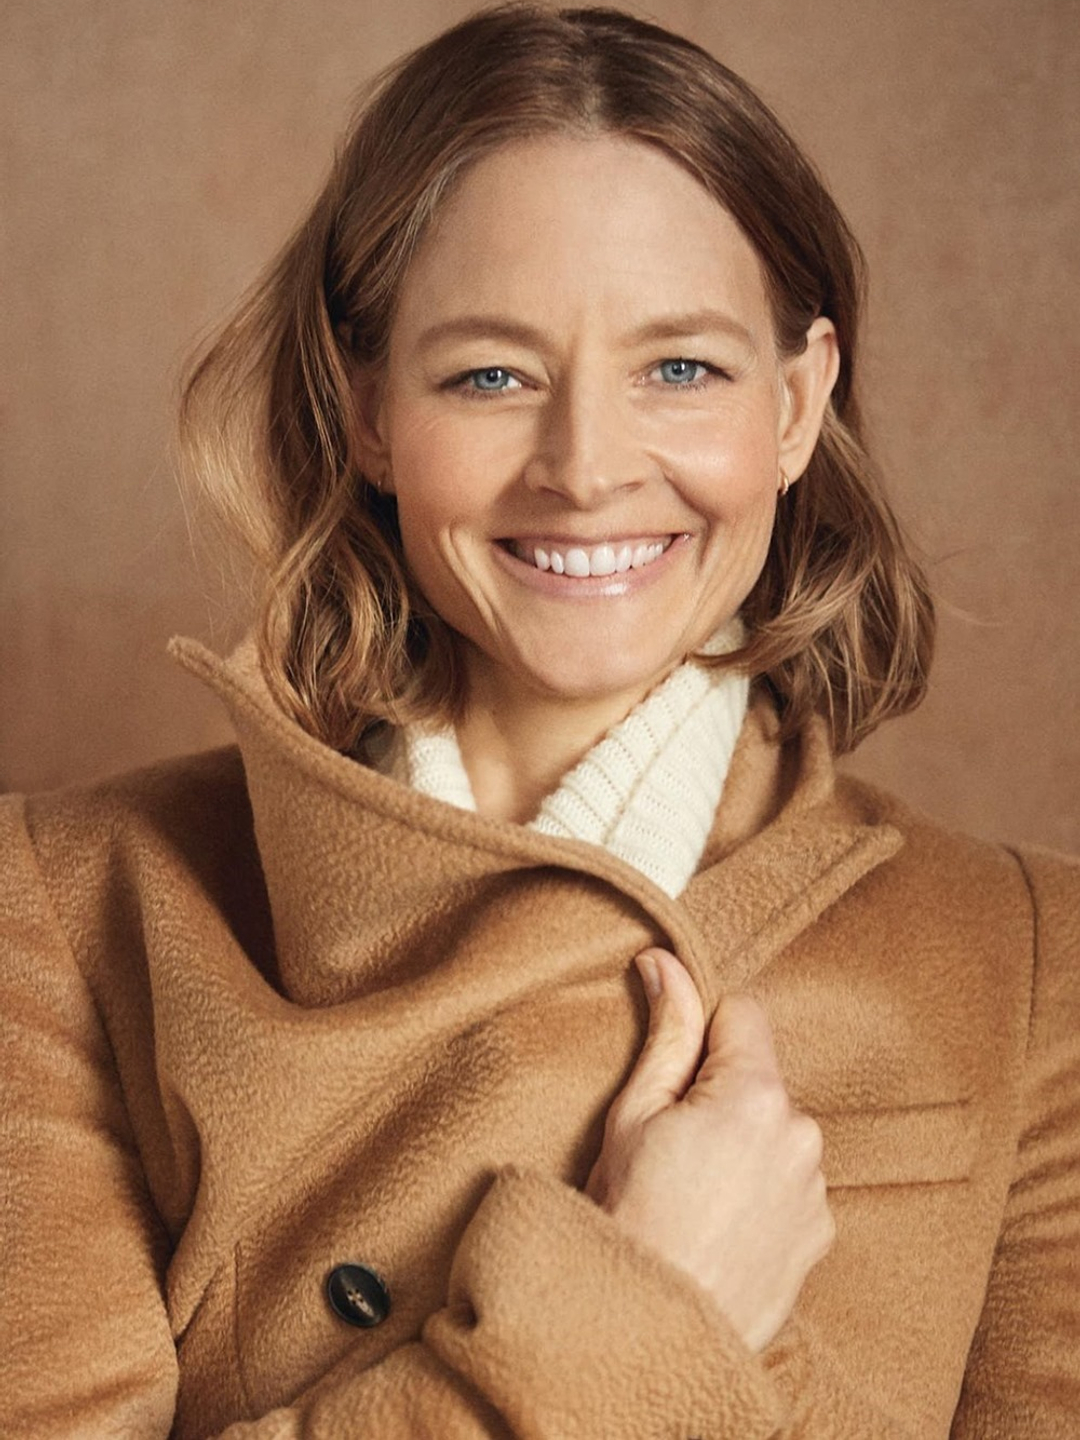 Jodie Foster where did she study